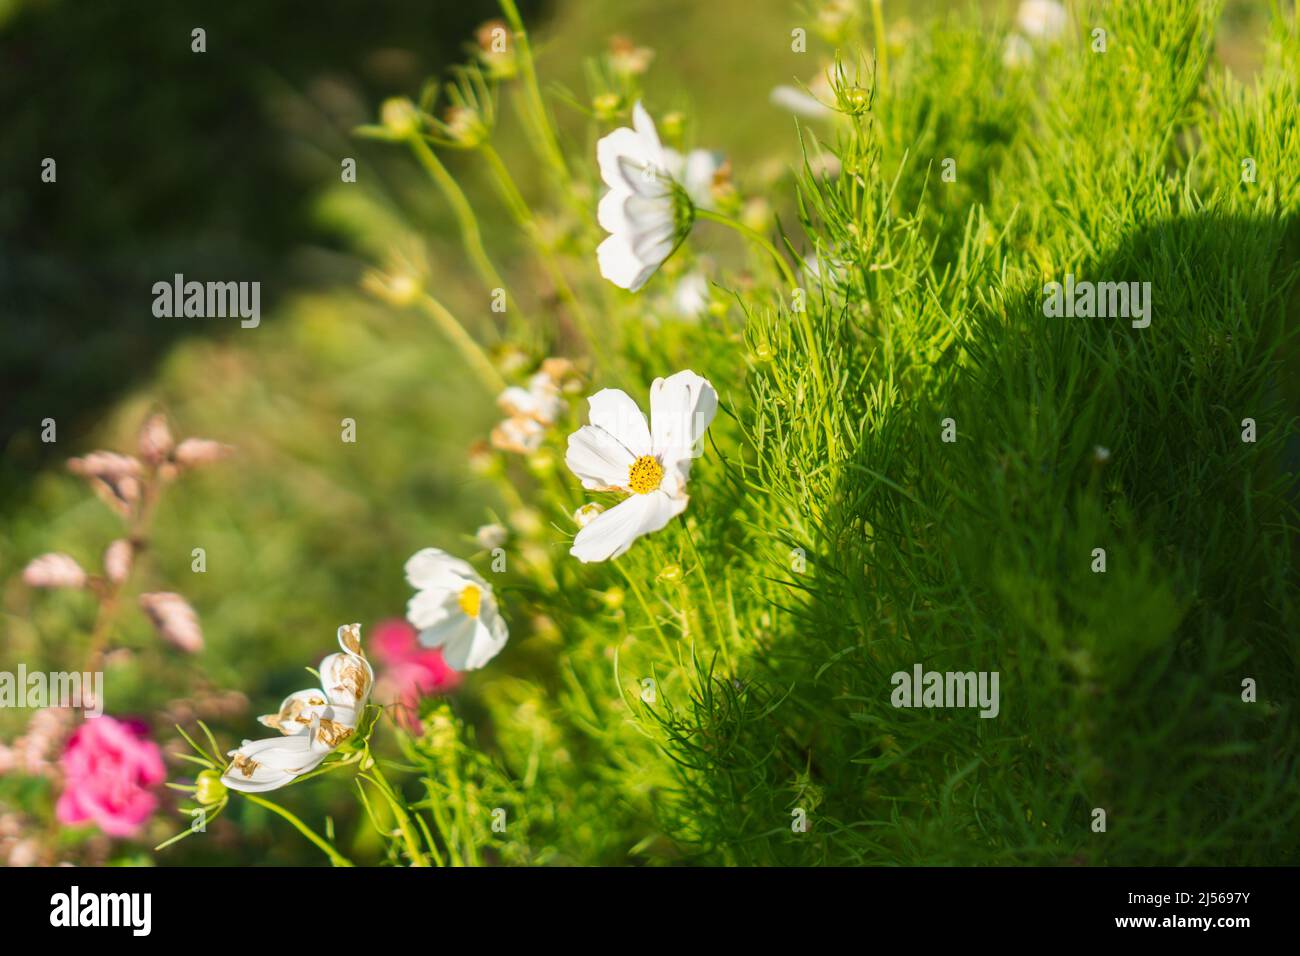 Cosmos Flower and Fresh Green Grass Shines With Morning Light. Stock Photo